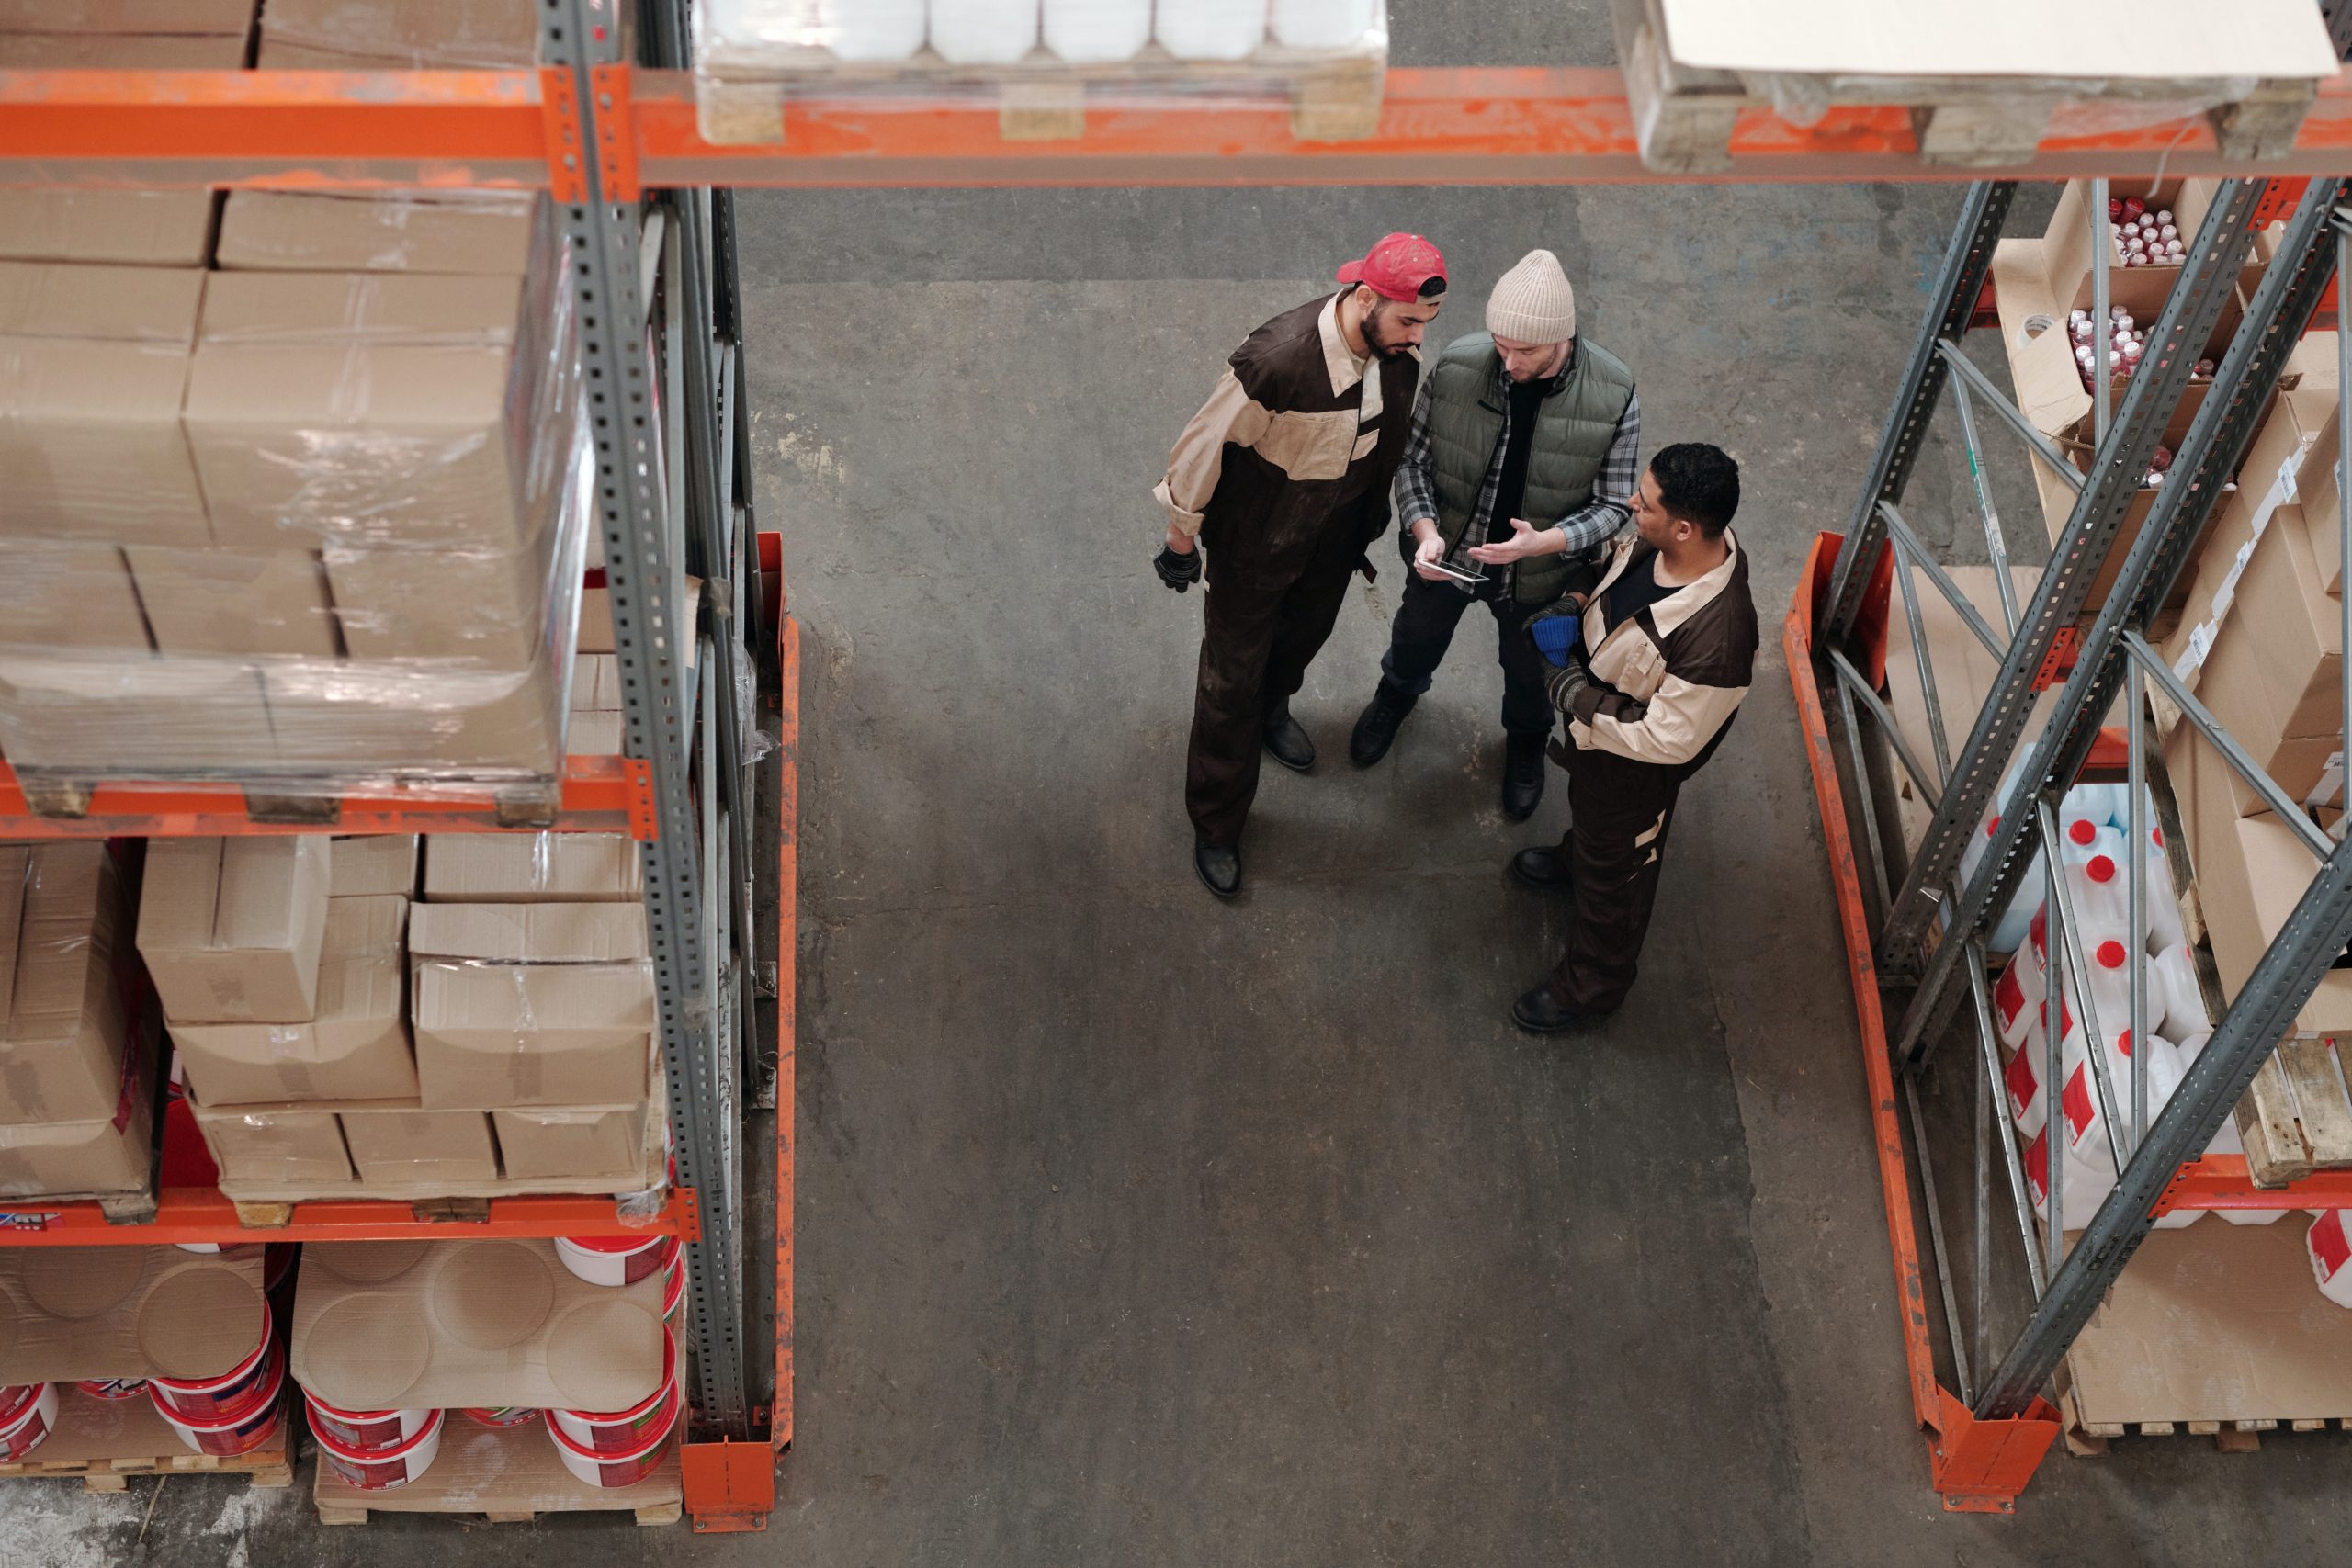 Wholesale Distribution business will benefit with NetSuite ERP